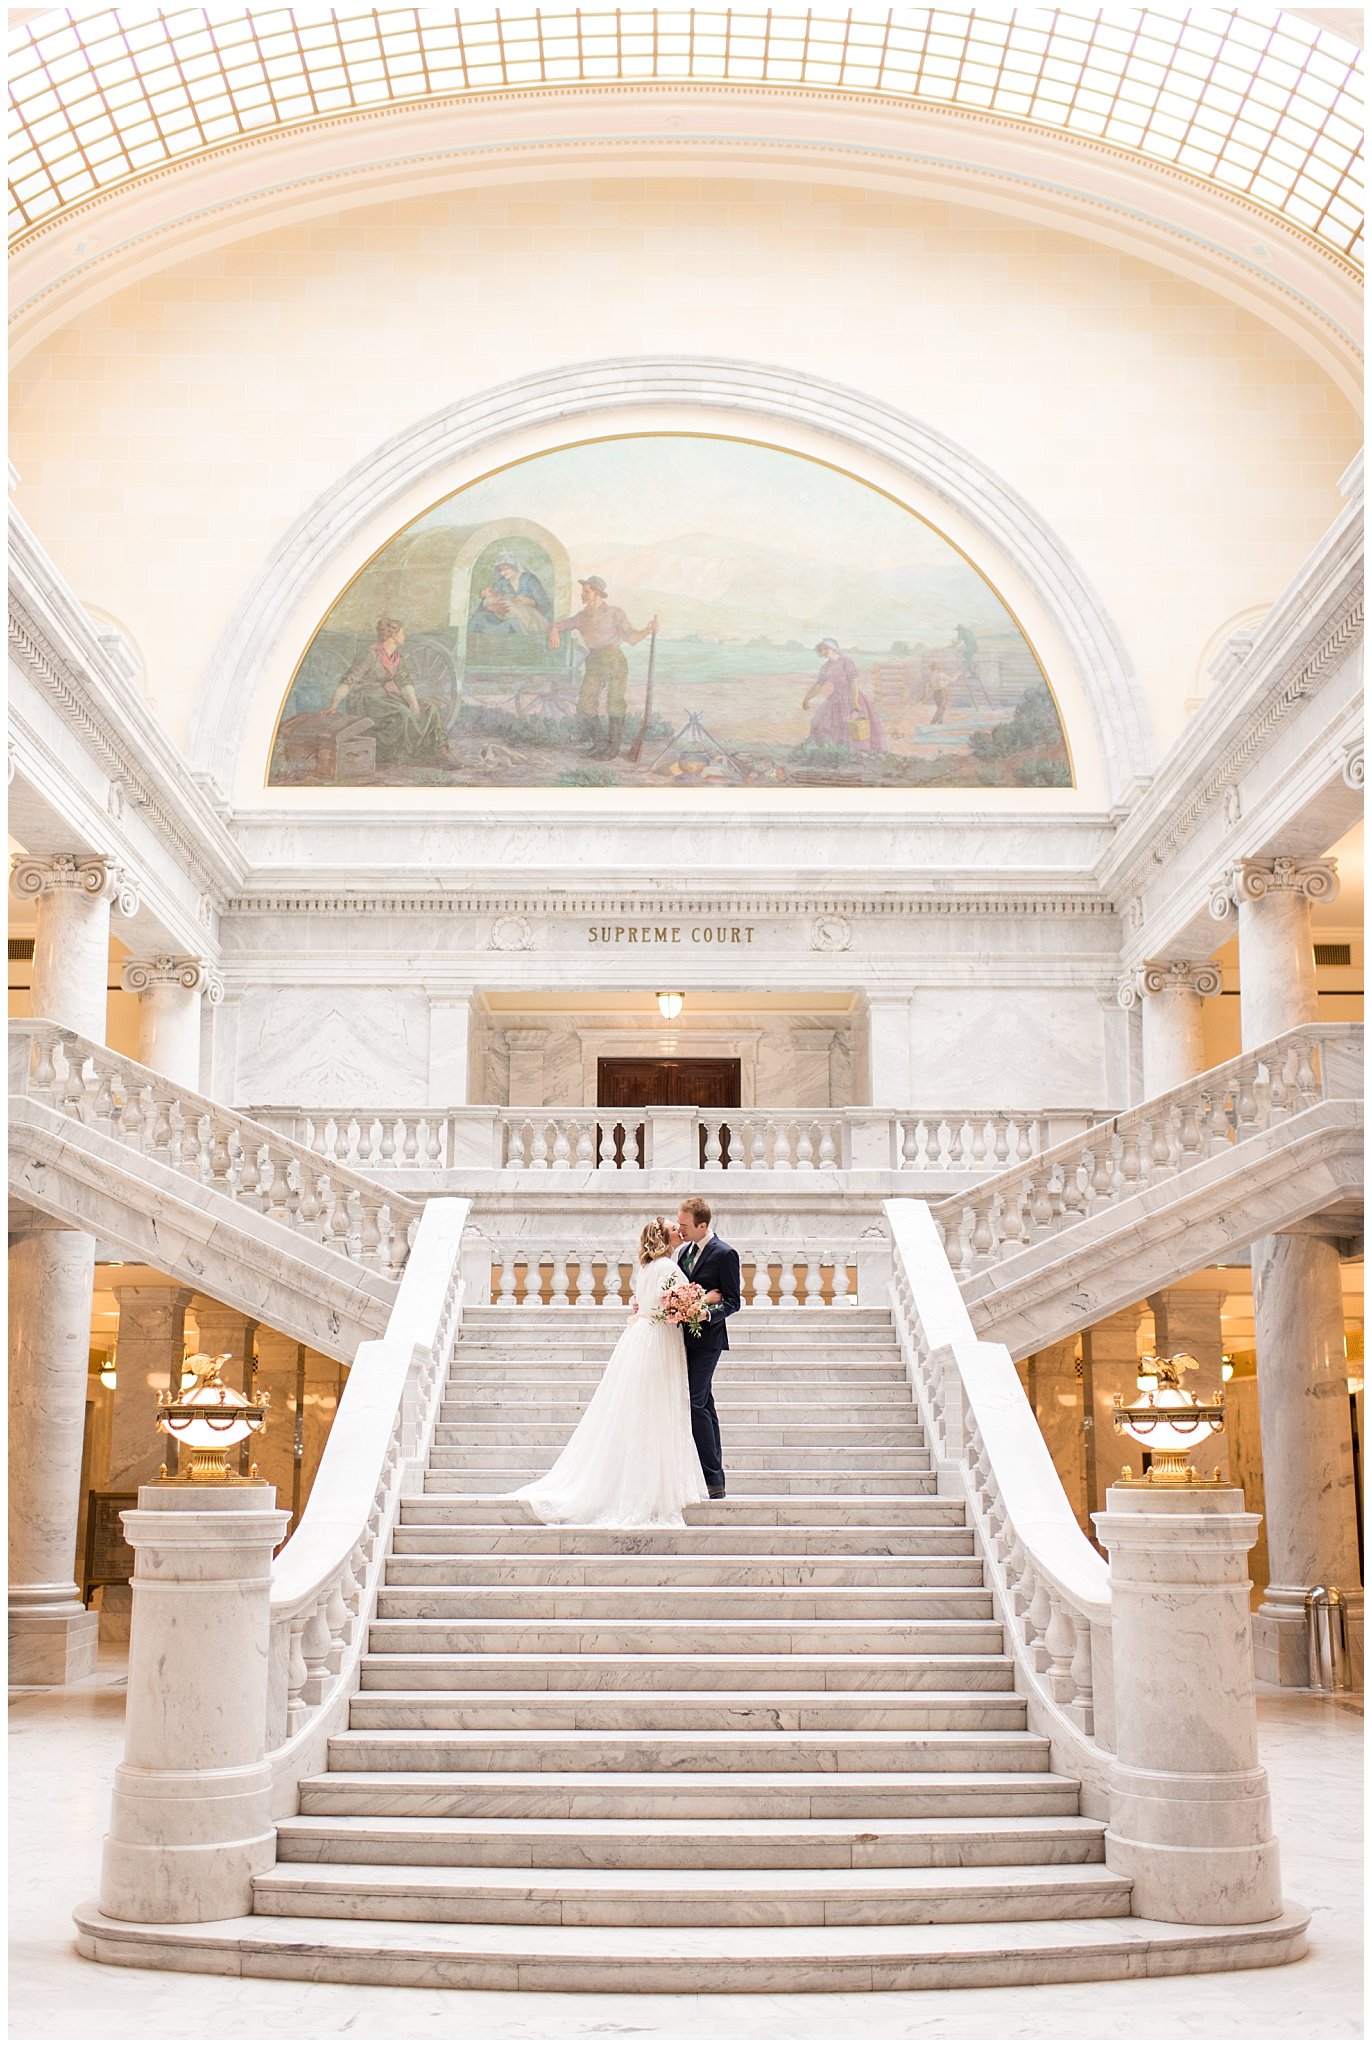 Bride and groom kiss on steps of grand staircase | Winter Formals at the Utah State Capitol | Utah Wedding Photography